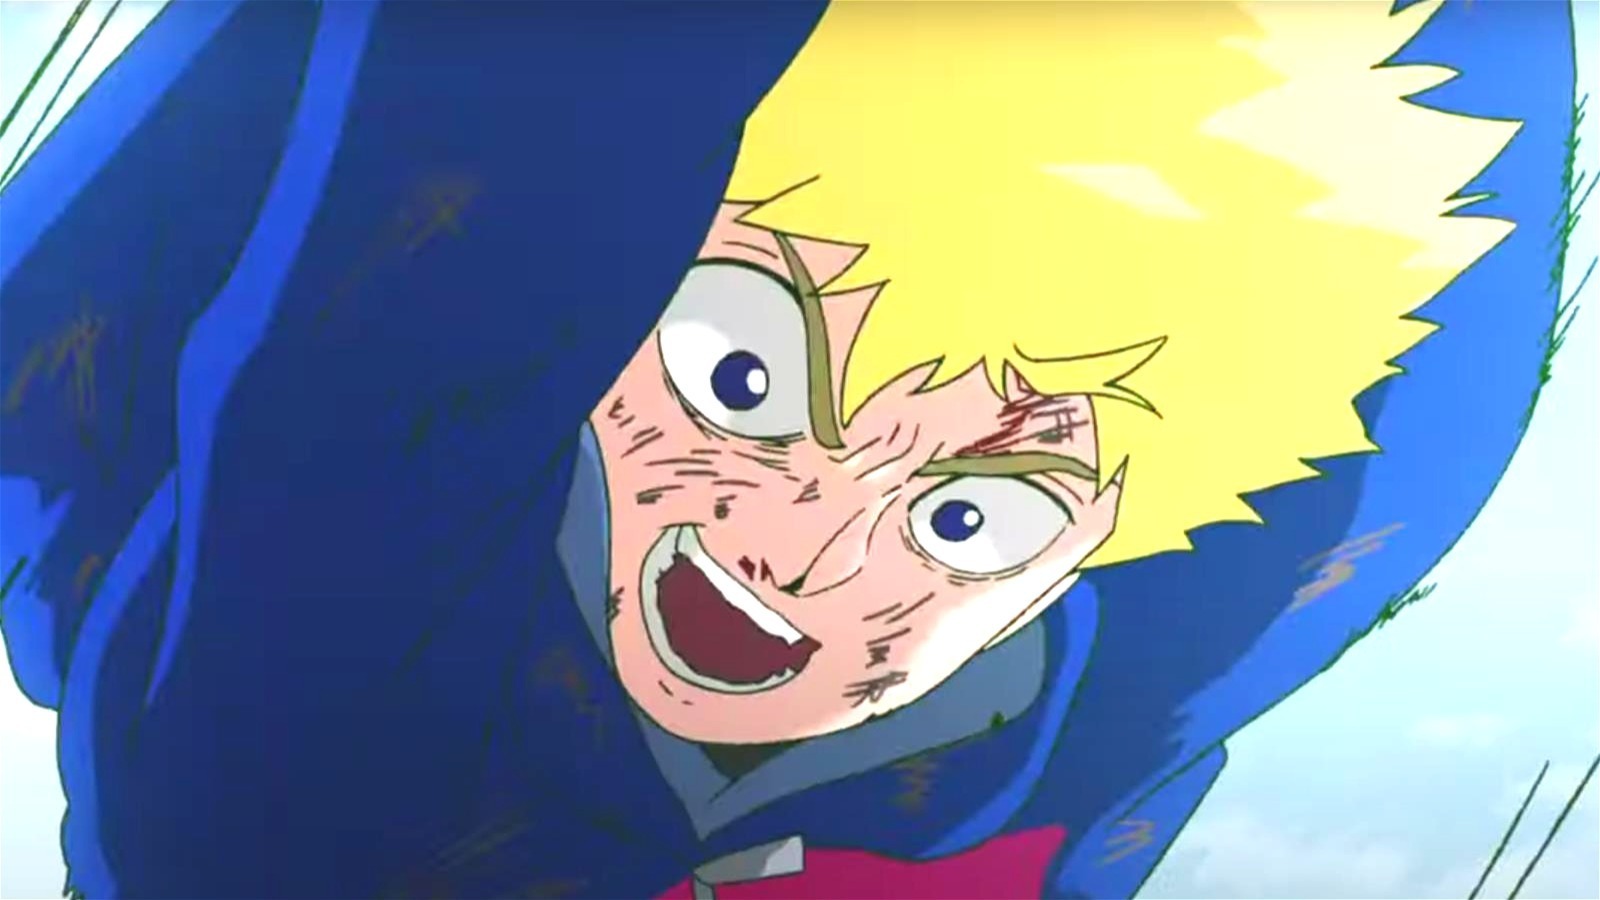 Mob Psycho 100 Fans Raging with Excitement Due to New Trailer